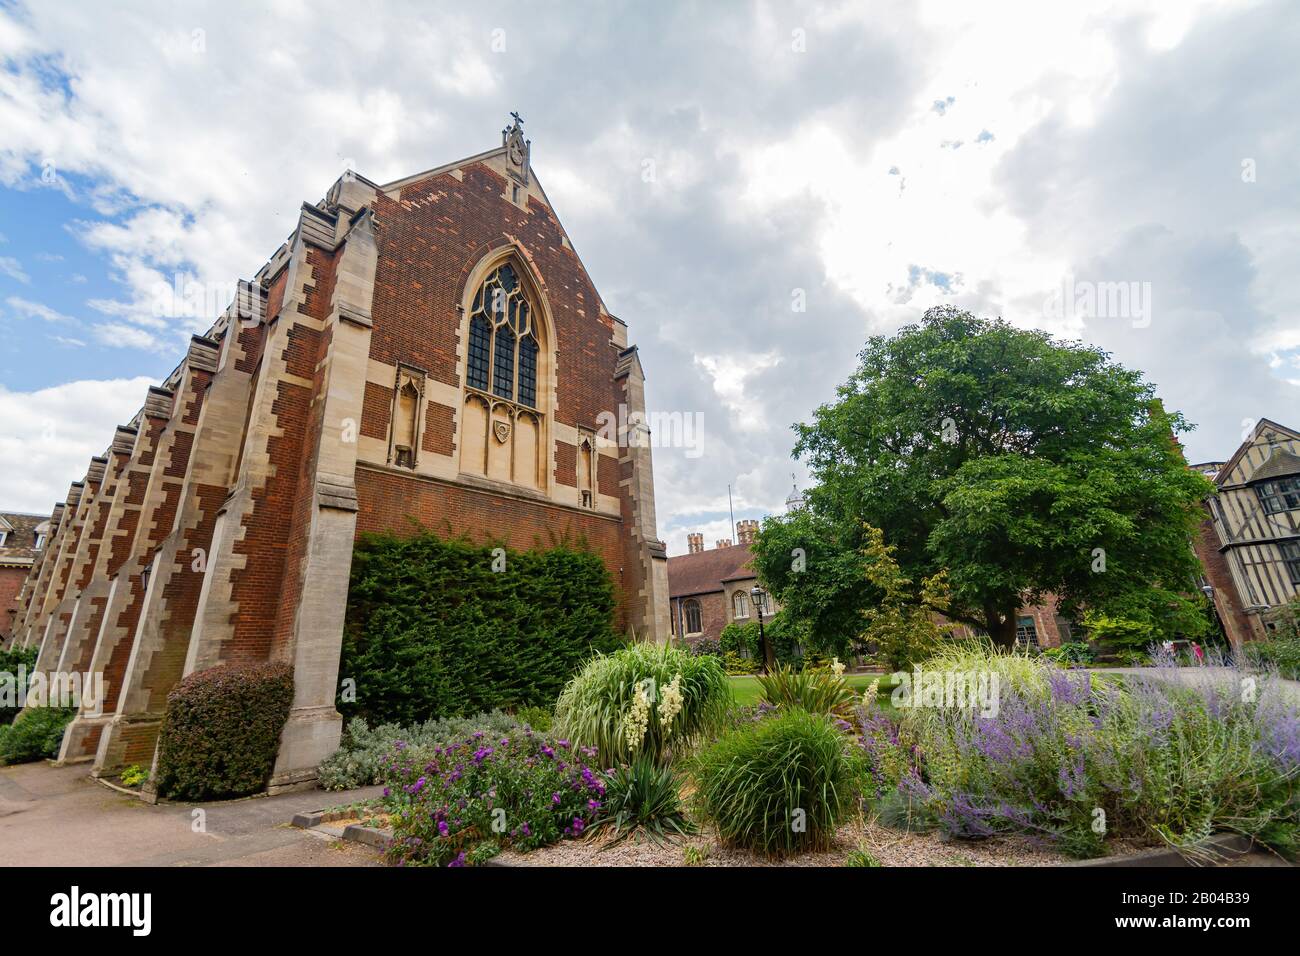 Cambridge, JUL 10: Exterior view of the Queens' College Chapel on JUL 10, 2011 at Cambrdige, United Kingdom Stock Photo